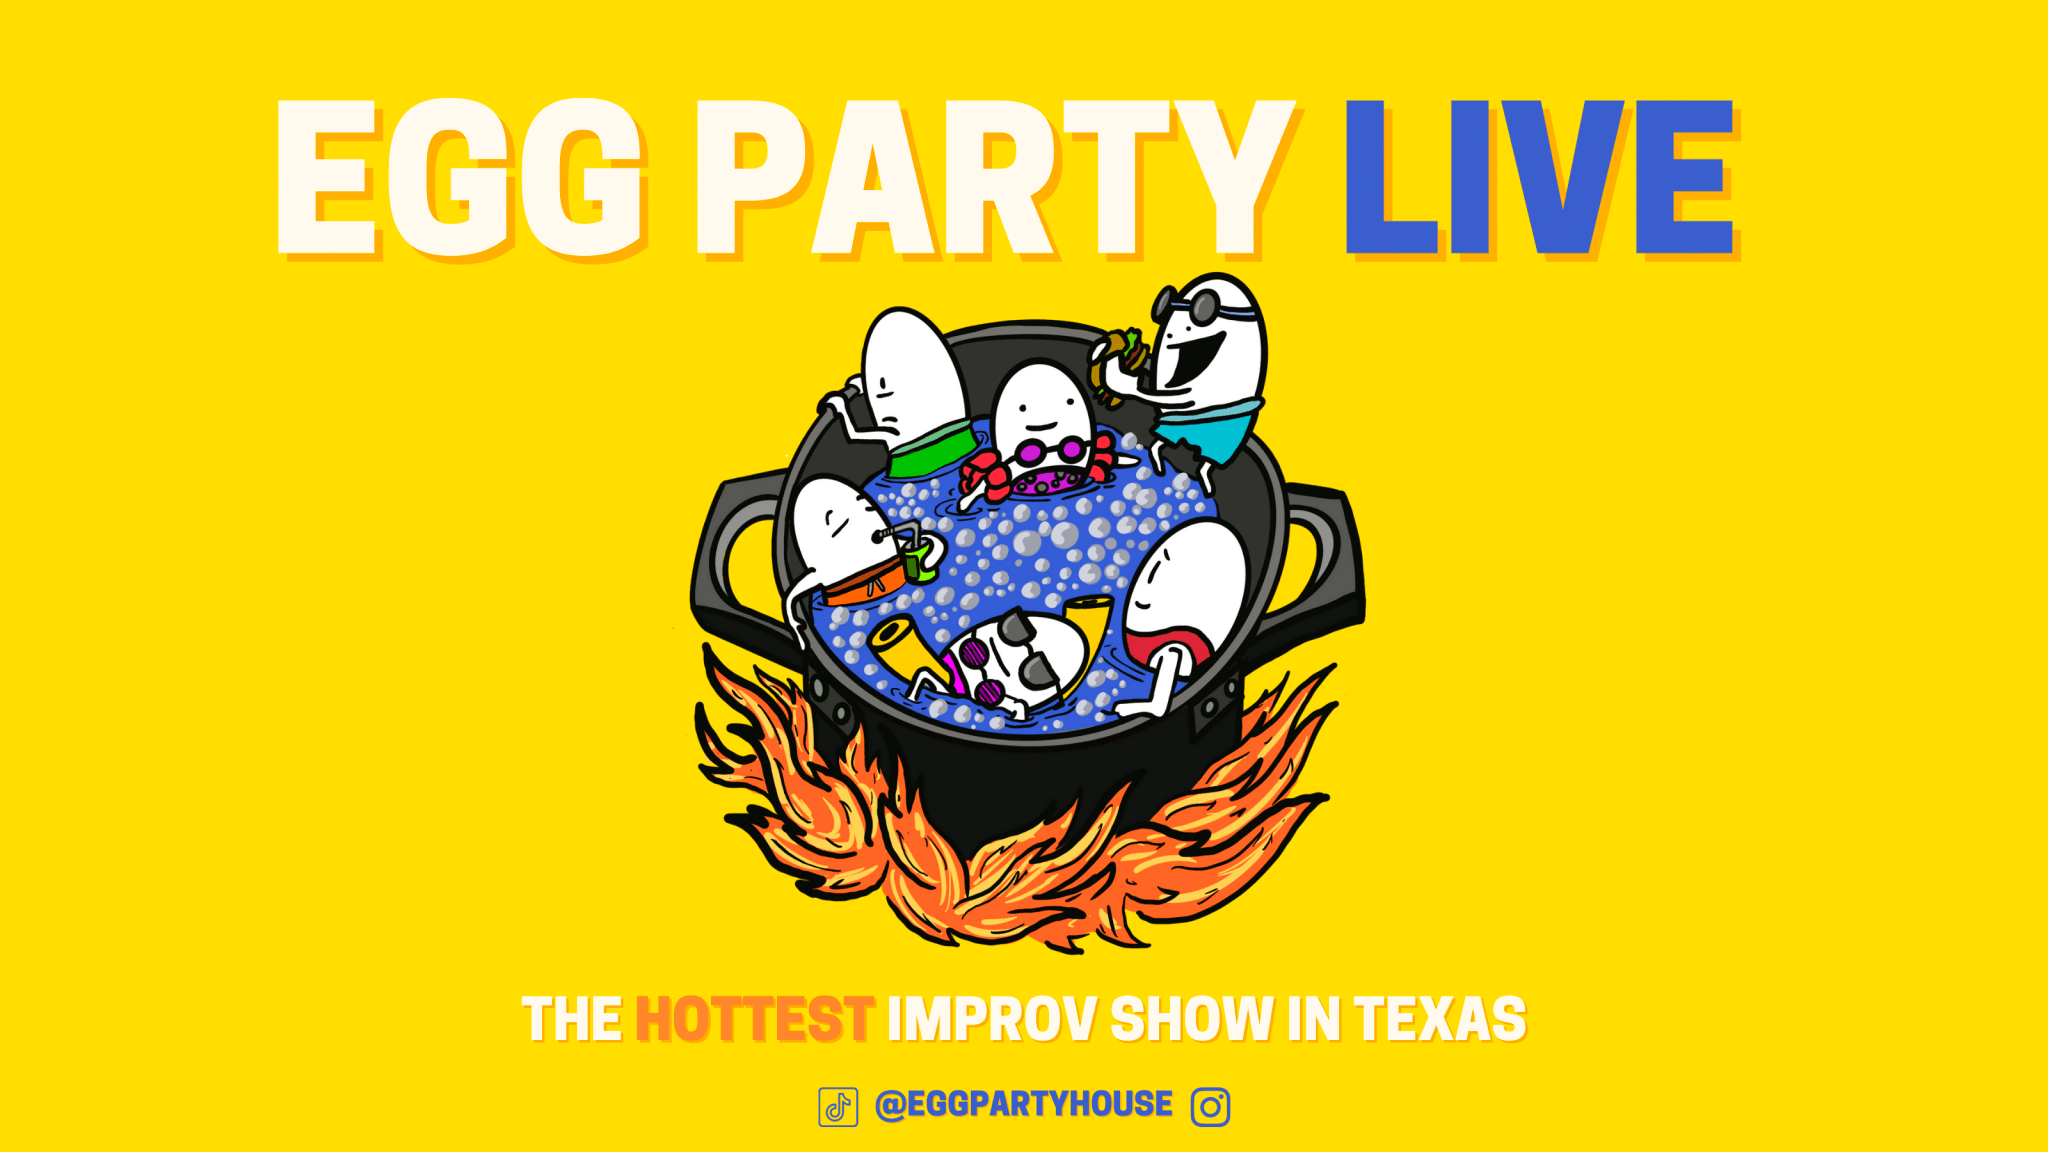 Egg Party Live